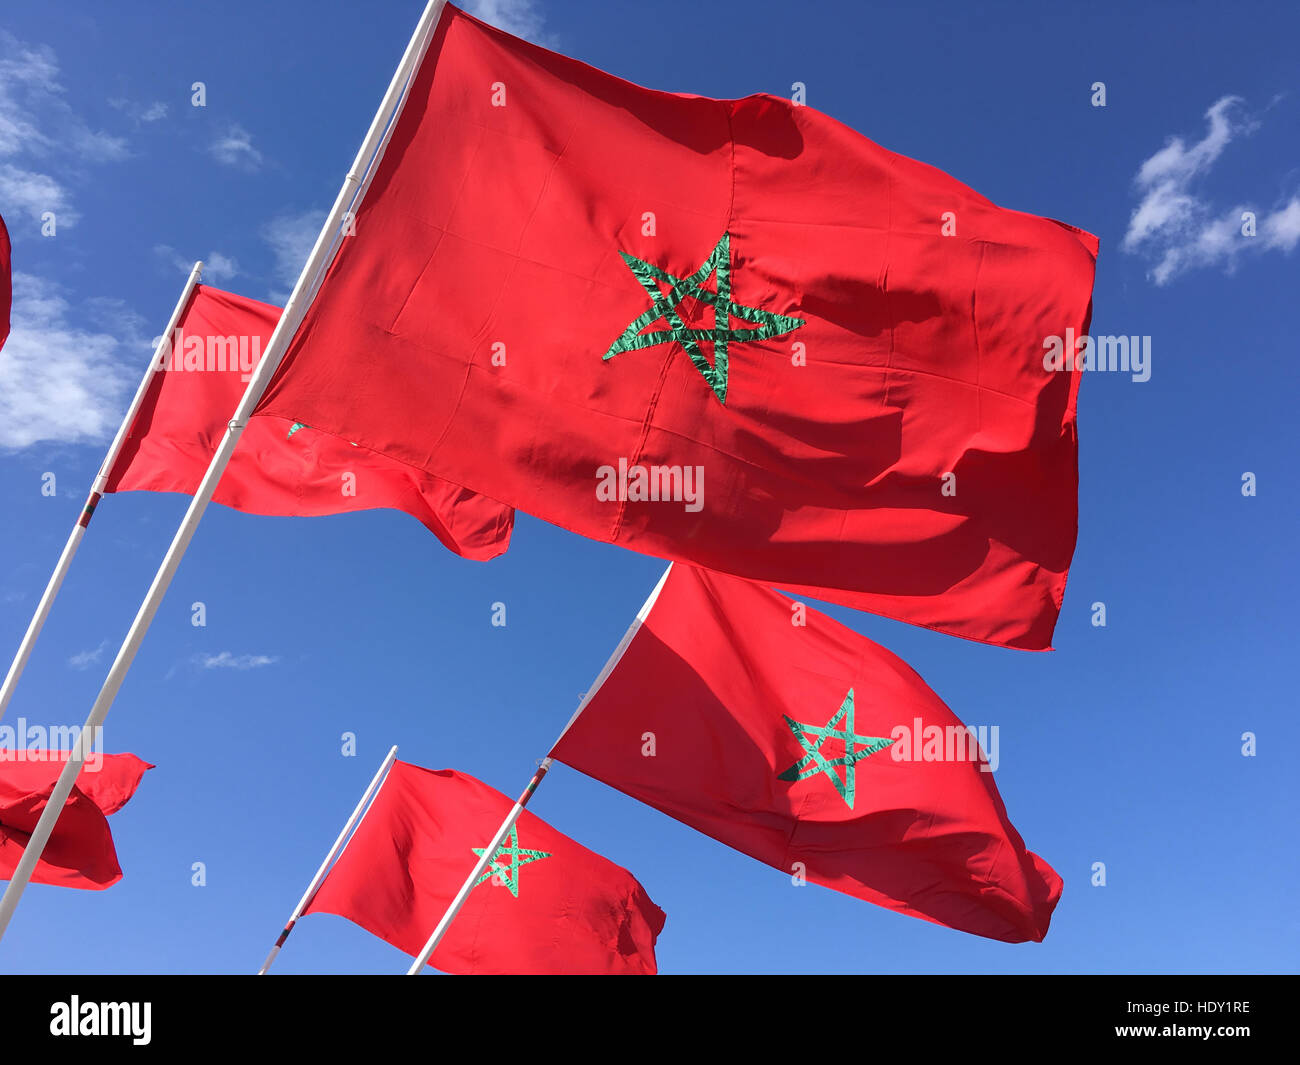 Moroccan flags fly in Marrakech, Morocco. Stock Photo